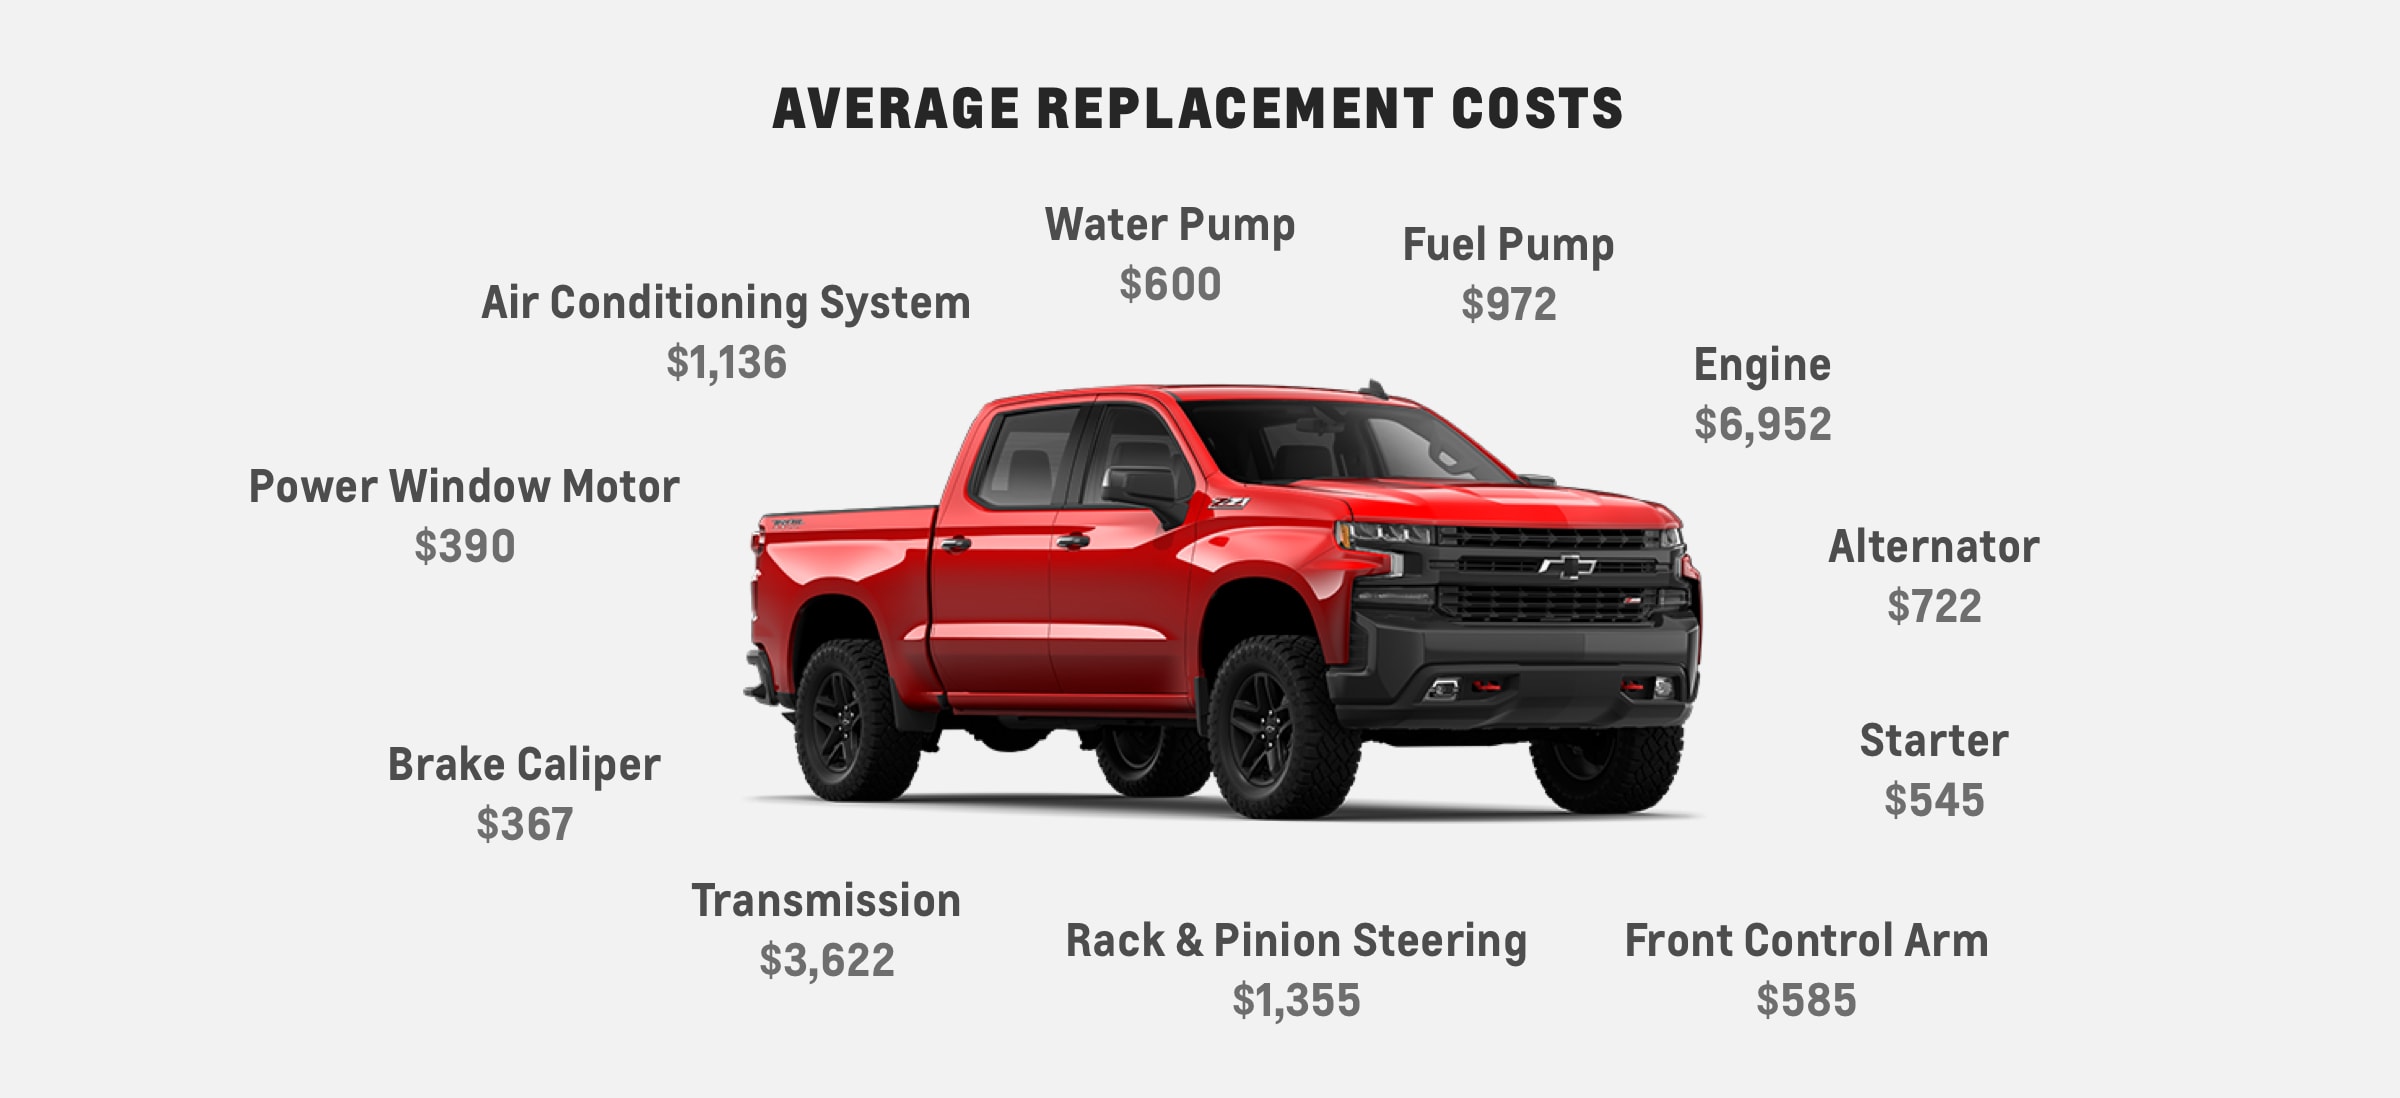 The average costs for an engine is $6,952. A transmission could cost $3,622. The Chevrolet Protection Plan covers 1,000+ auto parts for your vehicle when it's time for replacement.